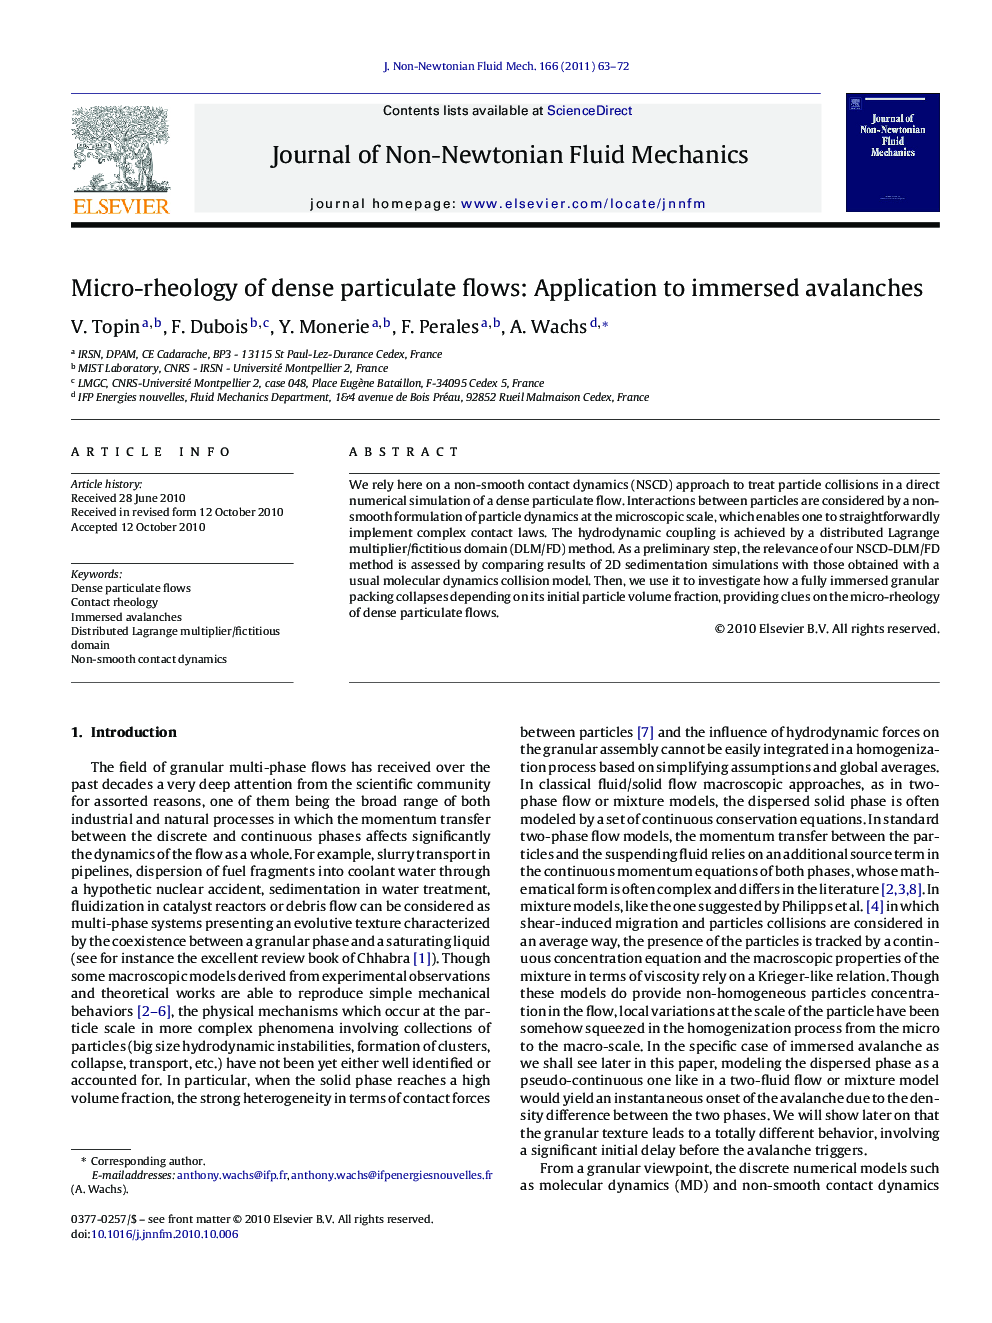 Micro-rheology of dense particulate flows: Application to immersed avalanches